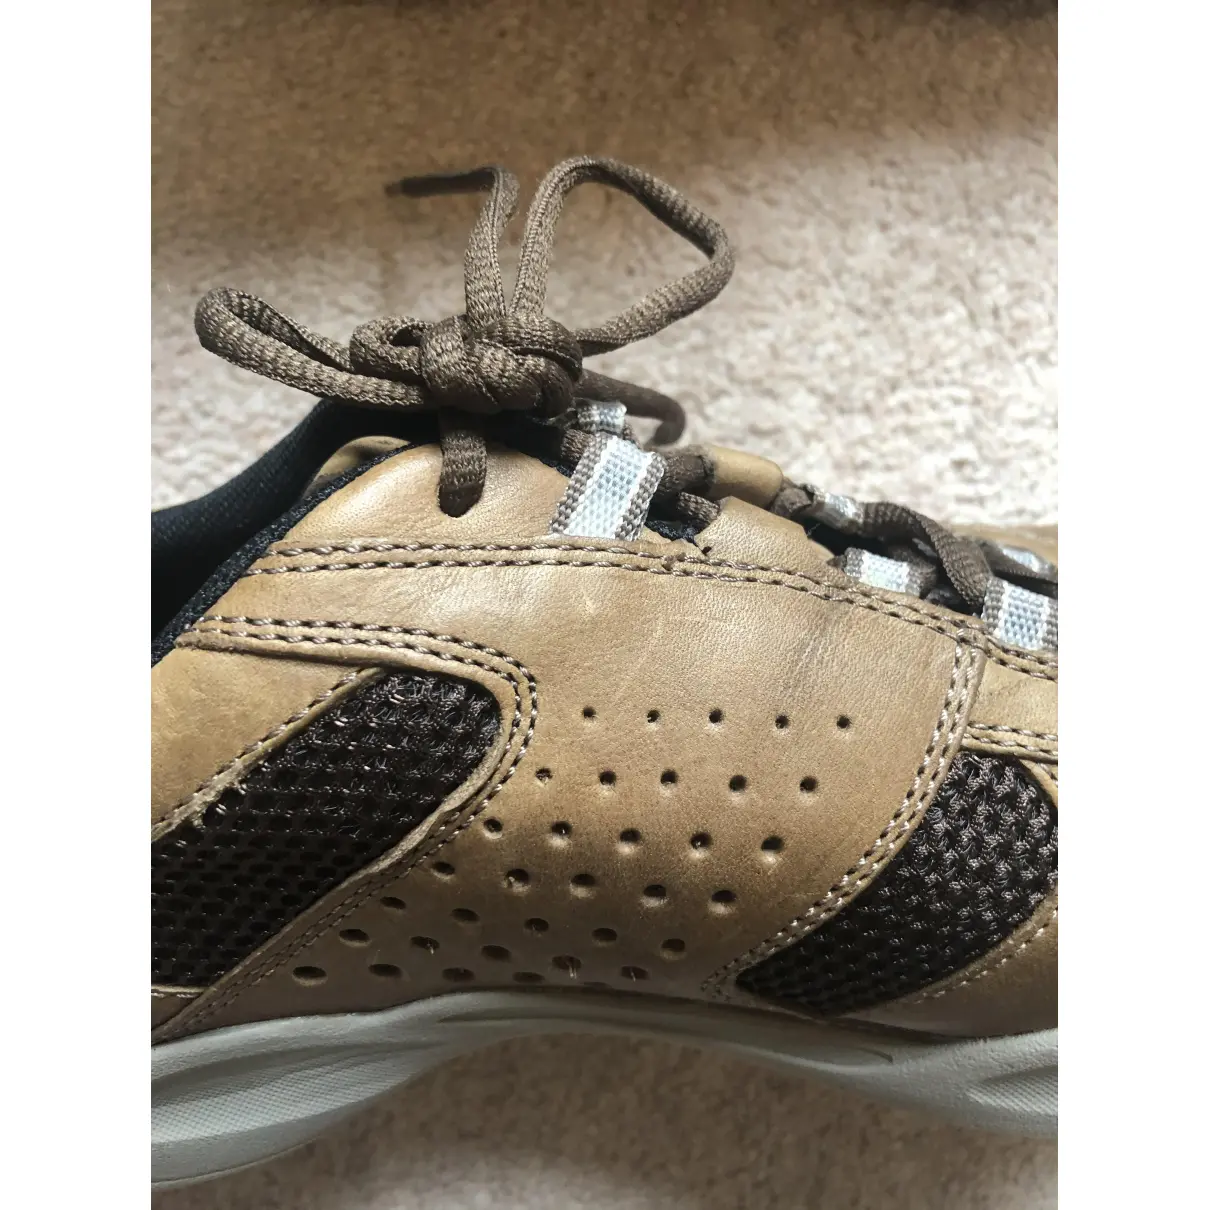 Buy Clarks Leather lace ups online